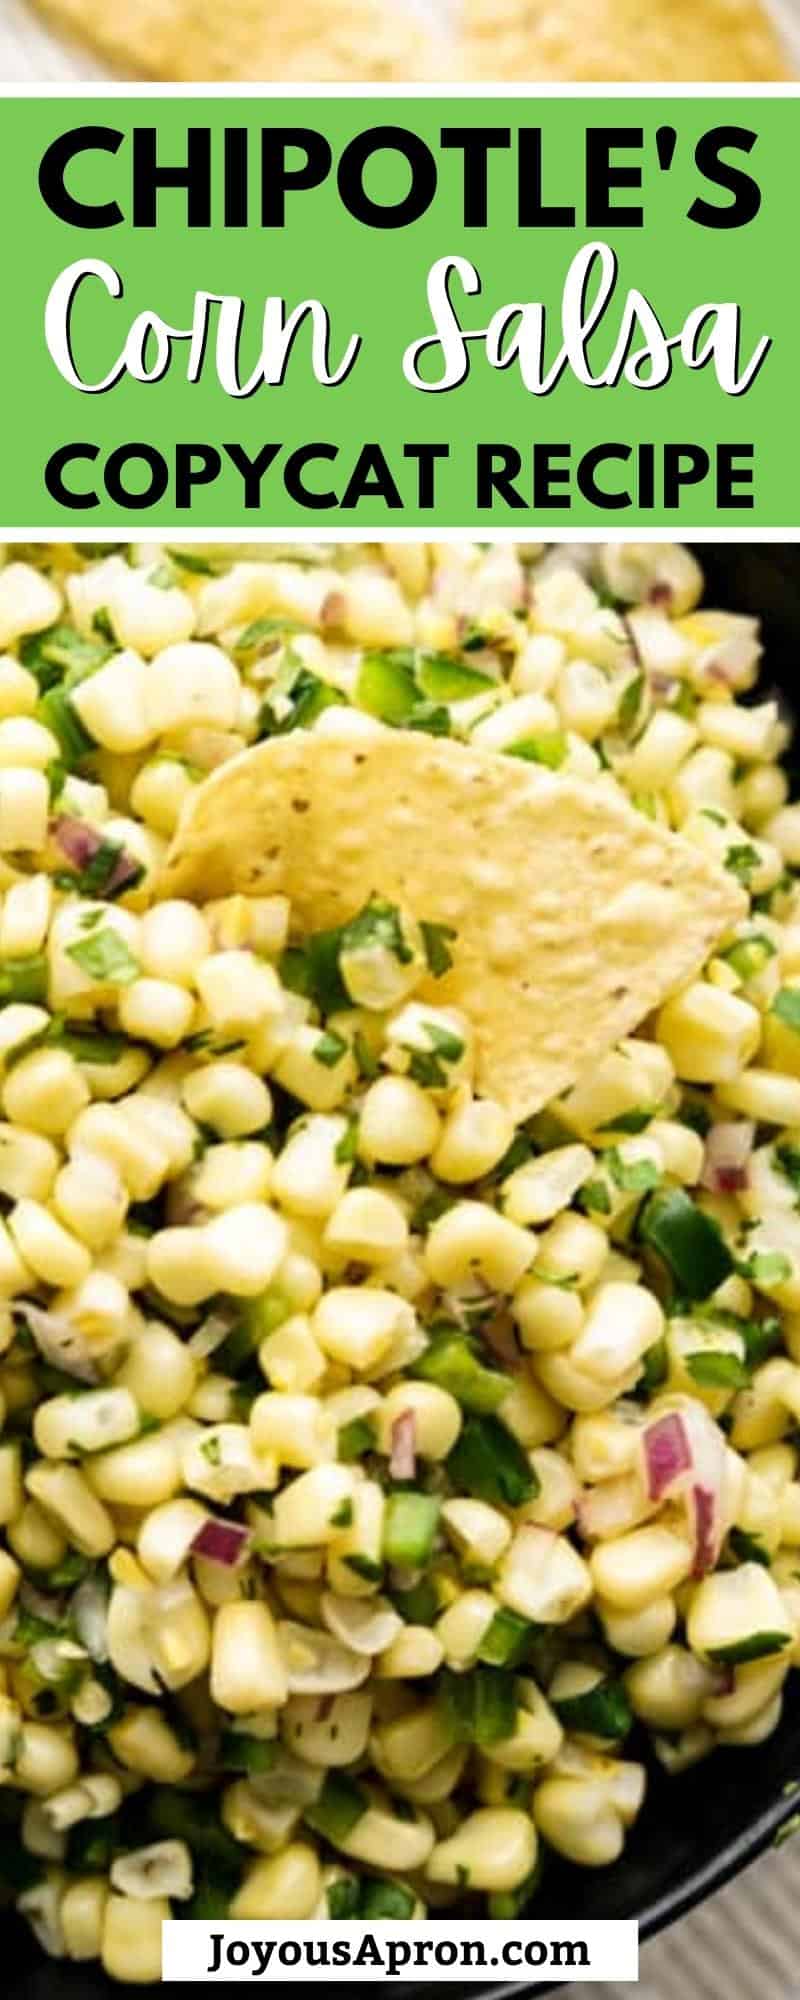 Chipotle Corn Jalapeño Salsa - Copycat Chipotle side dish and dip! Easy, healthy and no cook! Great for summer cookouts. Fresh and bright corn salsa tossed with jalapeños, red onions, cilantro and citrus juice. via @joyousapron